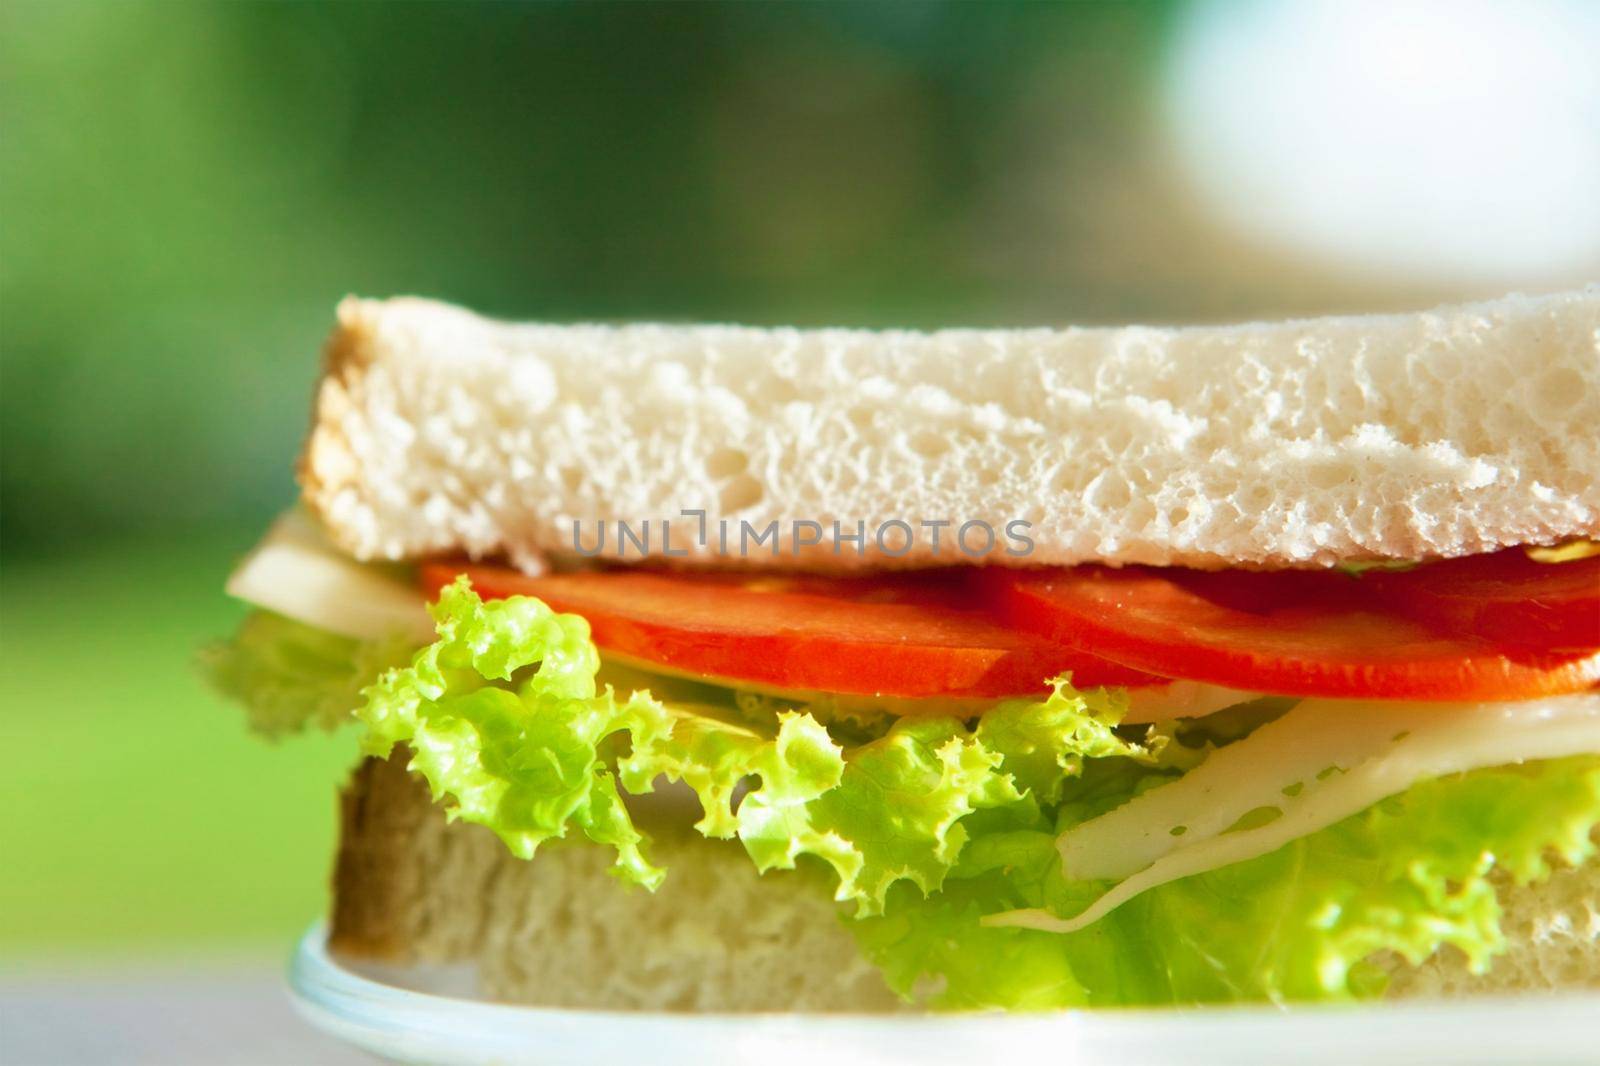 cheese and veggies sandwich - healthy snacks and homemade food styled concept by Anneleven